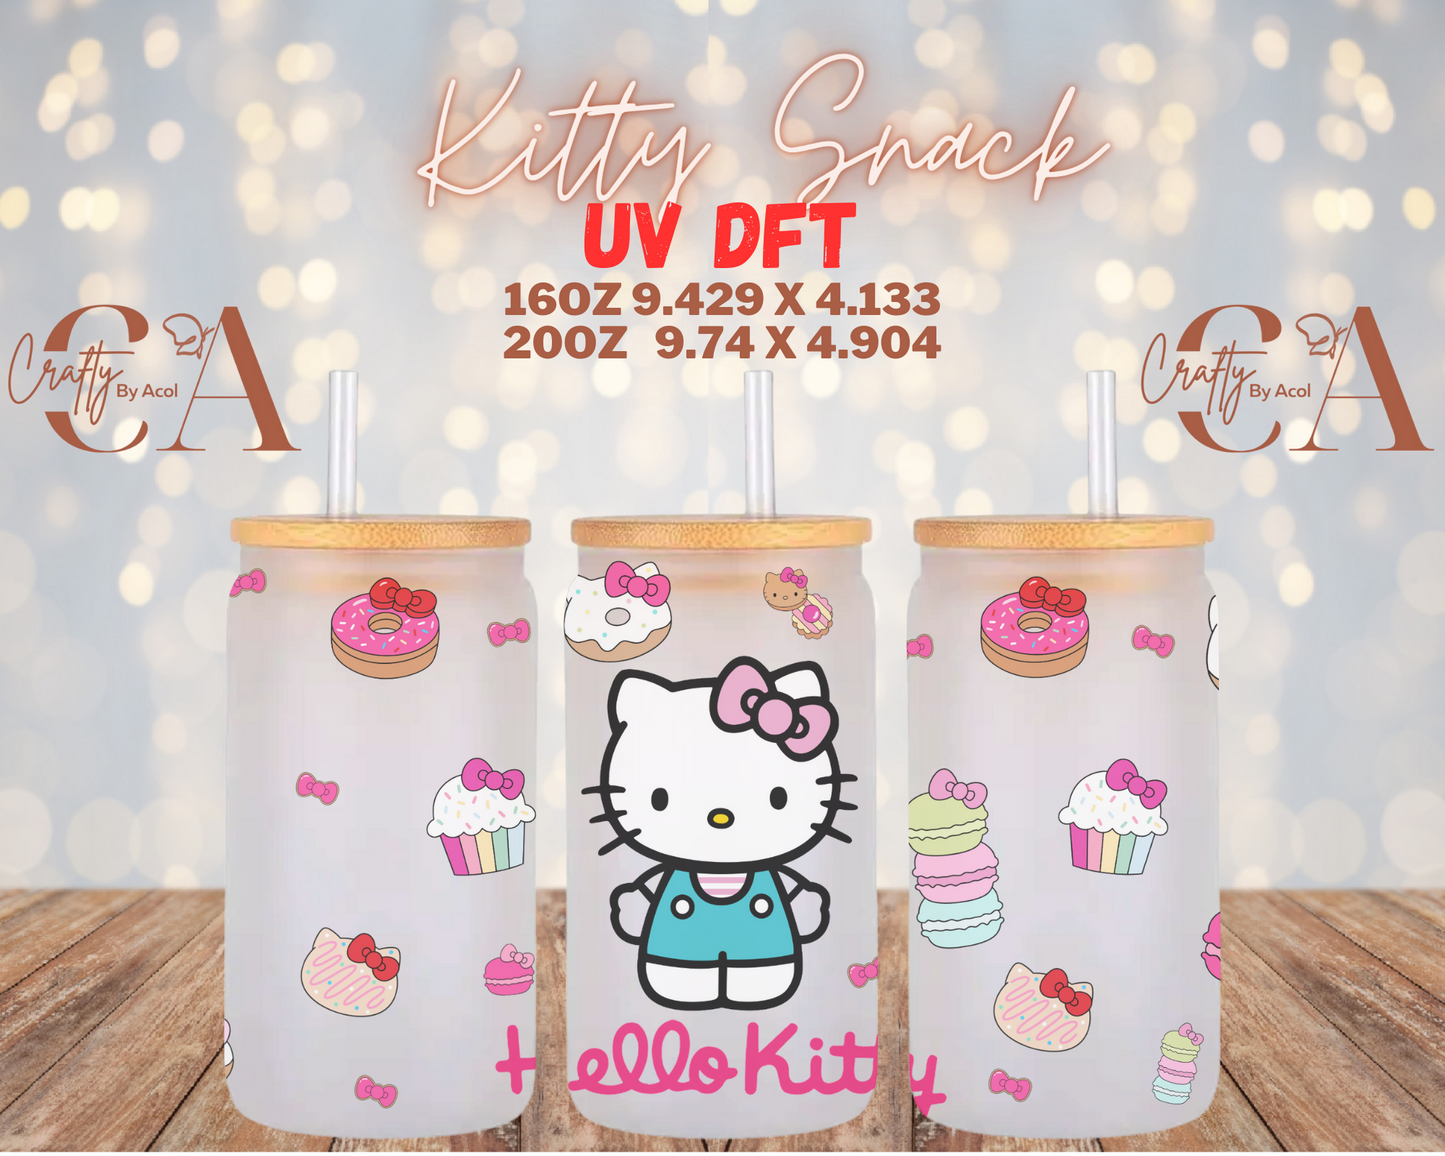 Kitty Snack UV DFT Cup Wrap